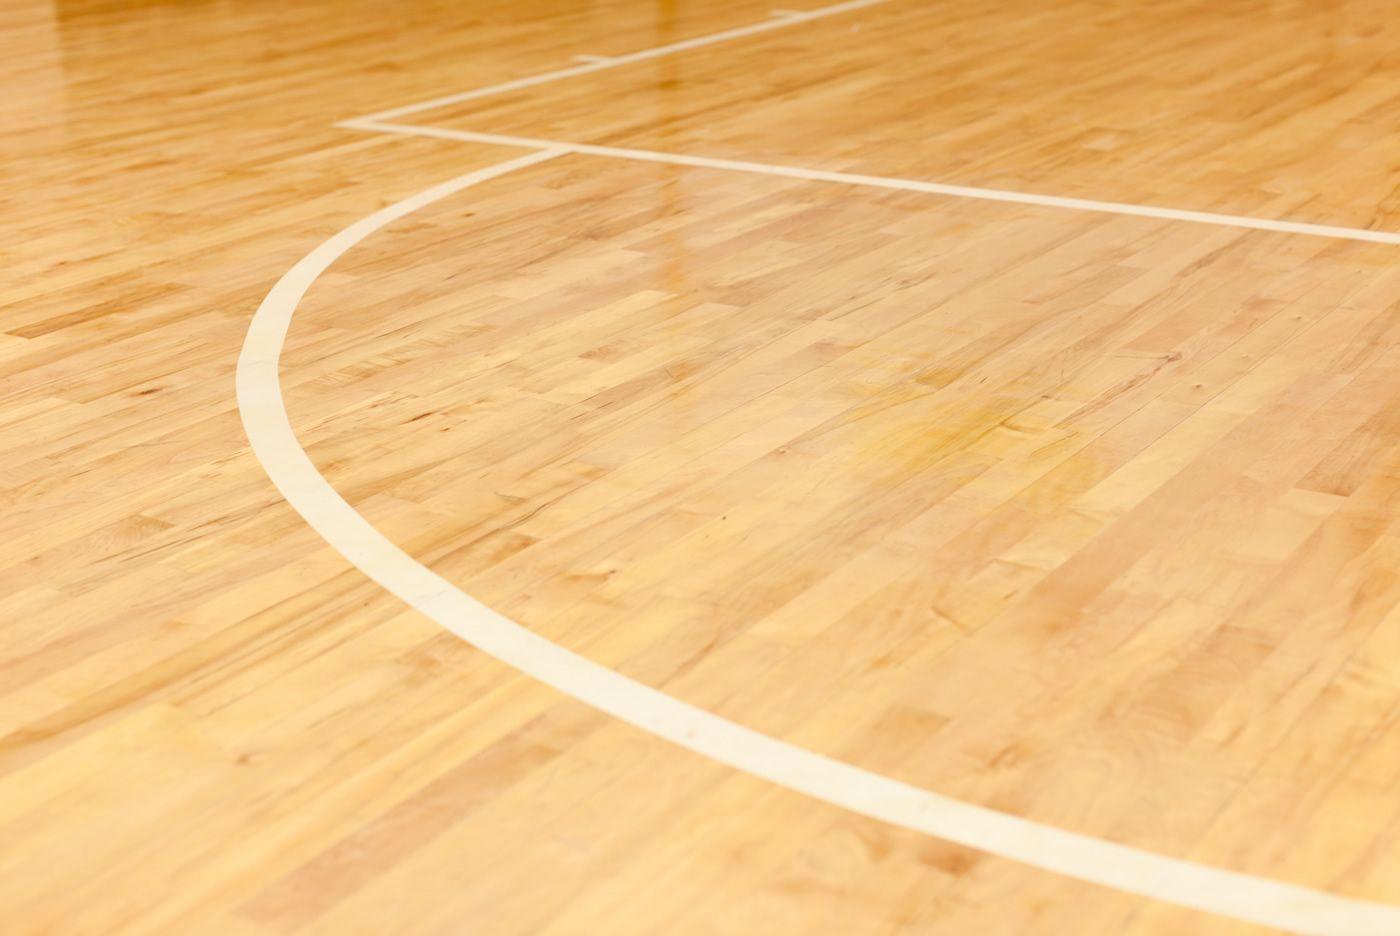 Register for Basketball, Volleyball and Other Court Sports Leagues